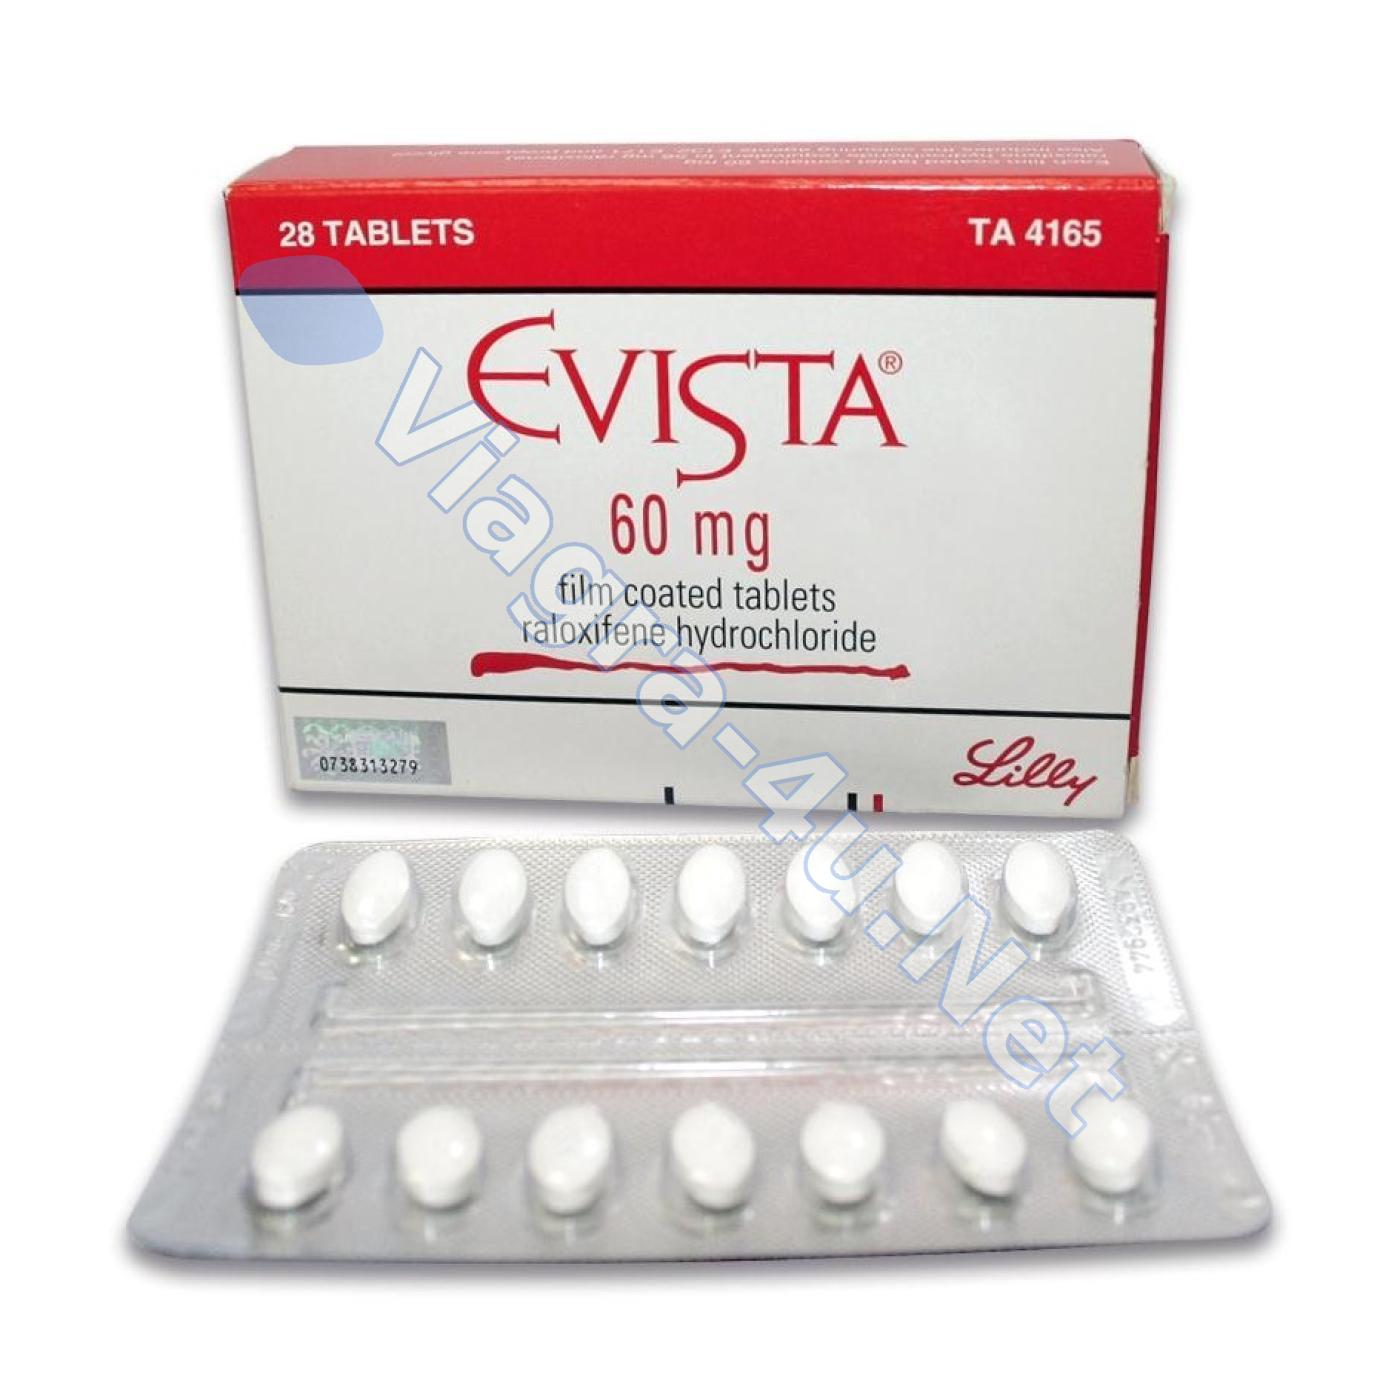 Buy generic viagra online with dosage info | canadian 